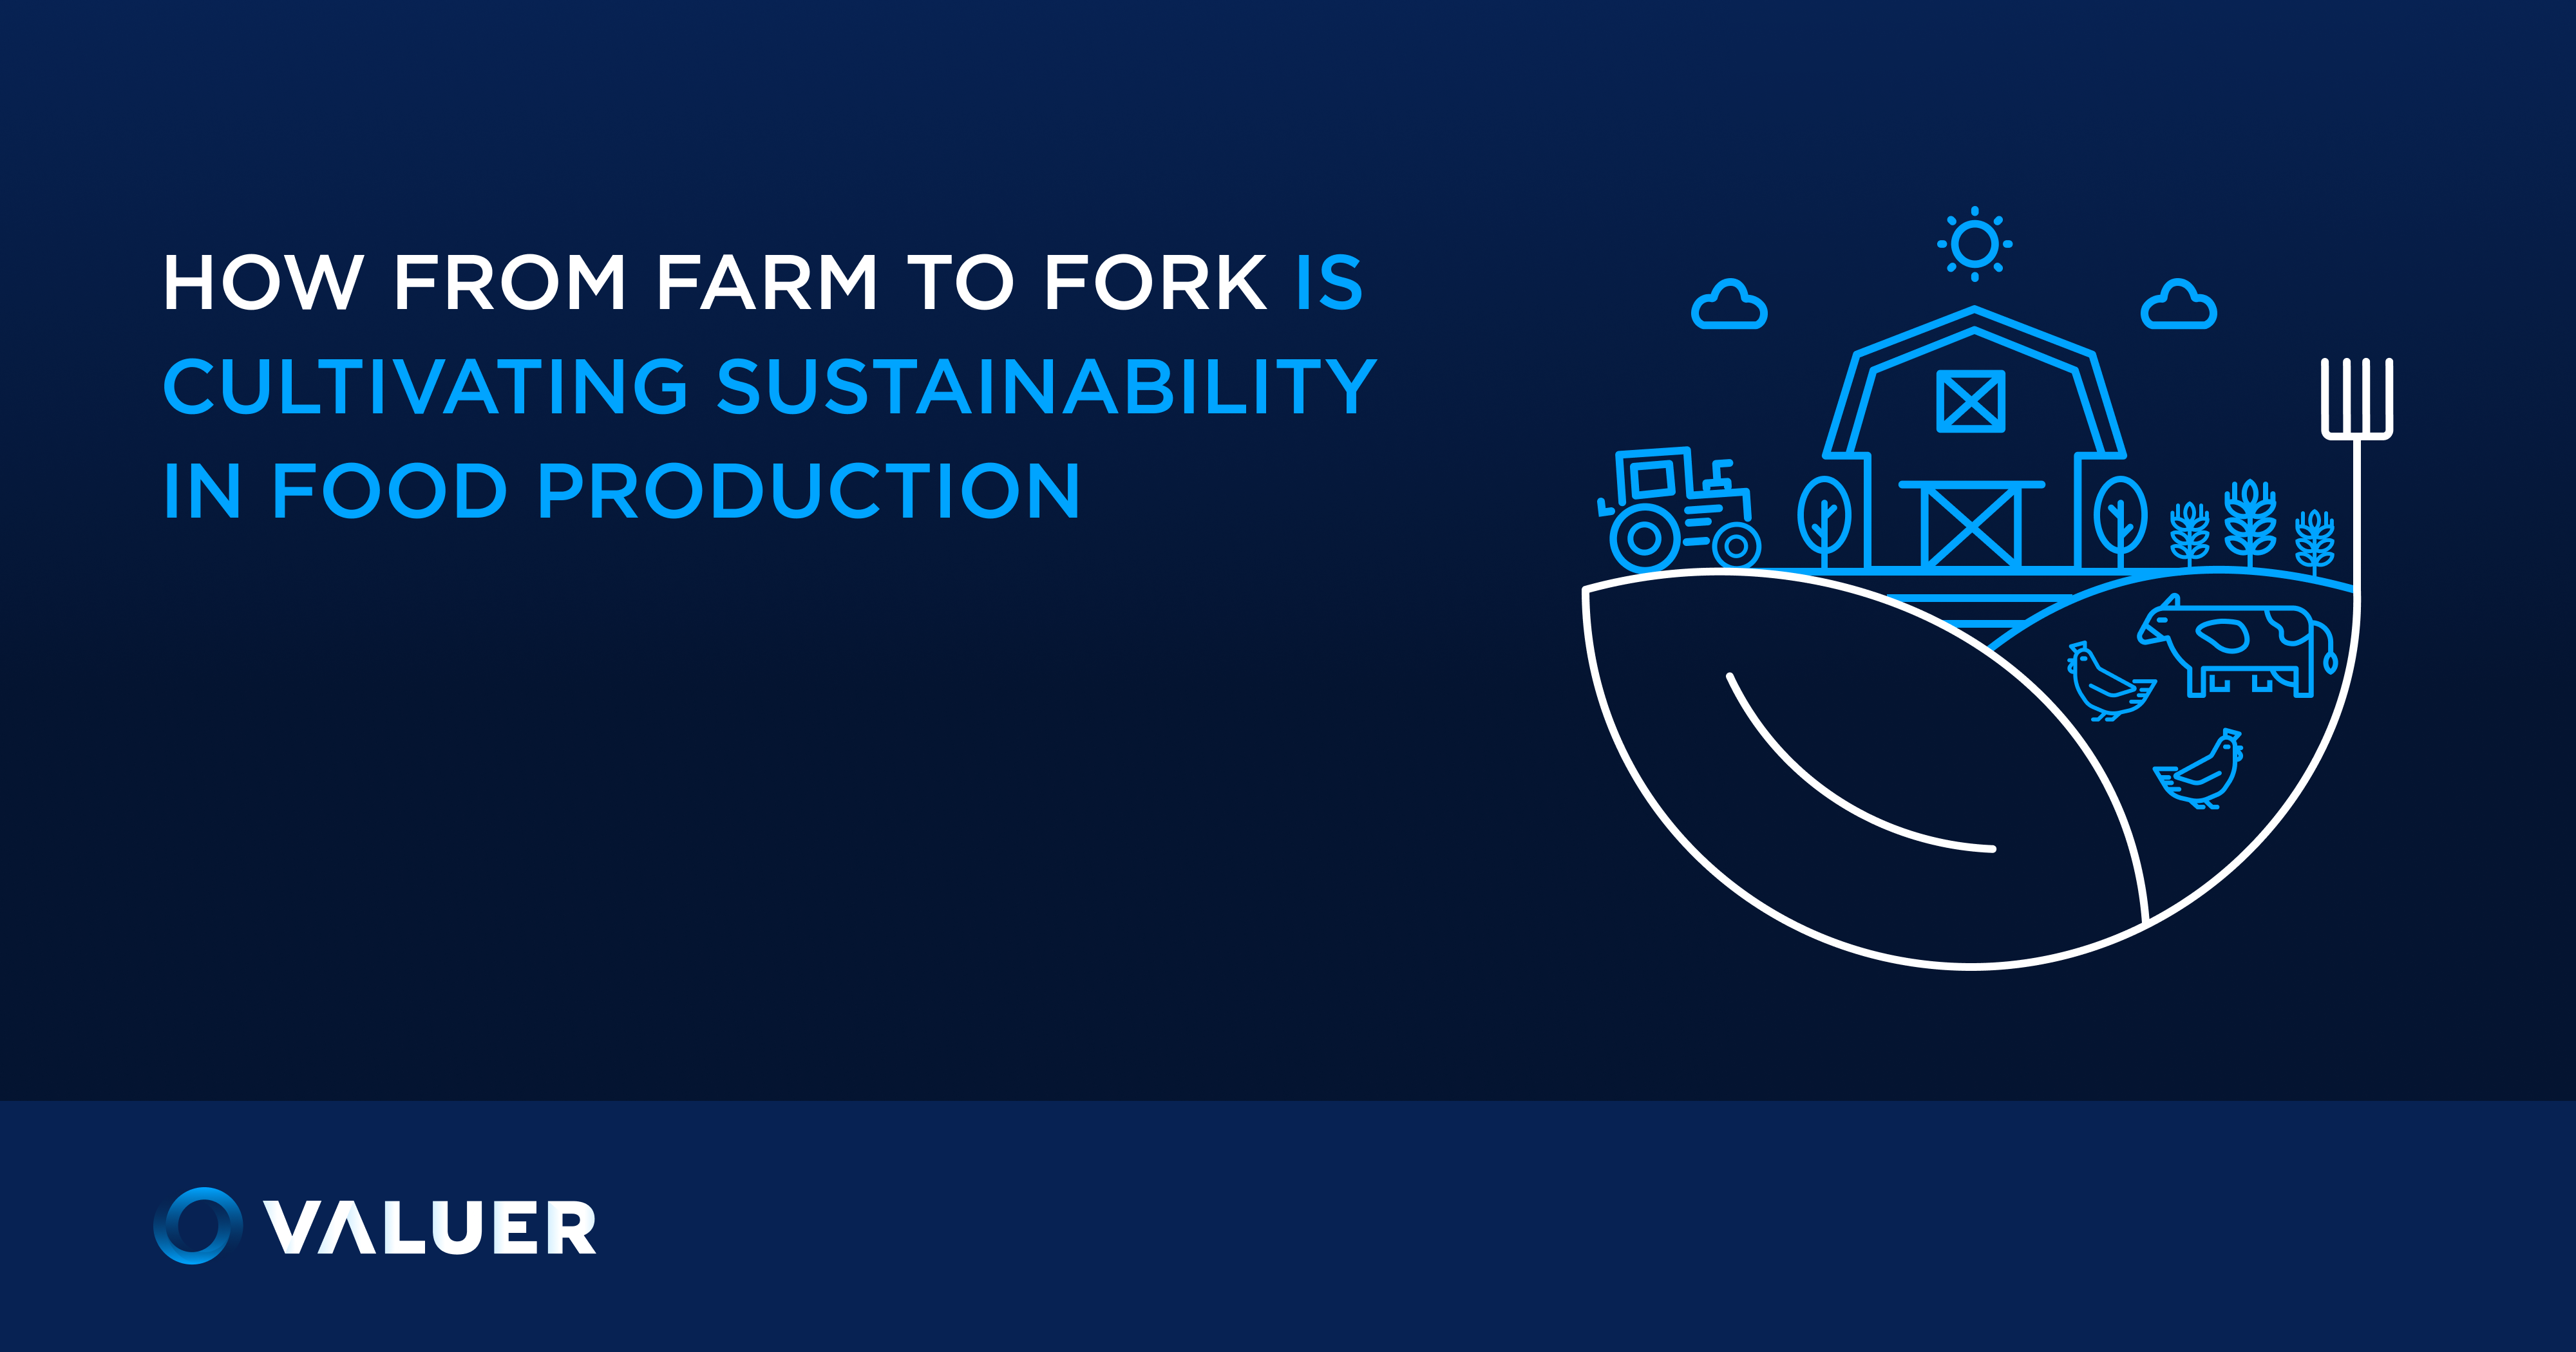 Farm to Fork Solutions: Sustainability in Food Production